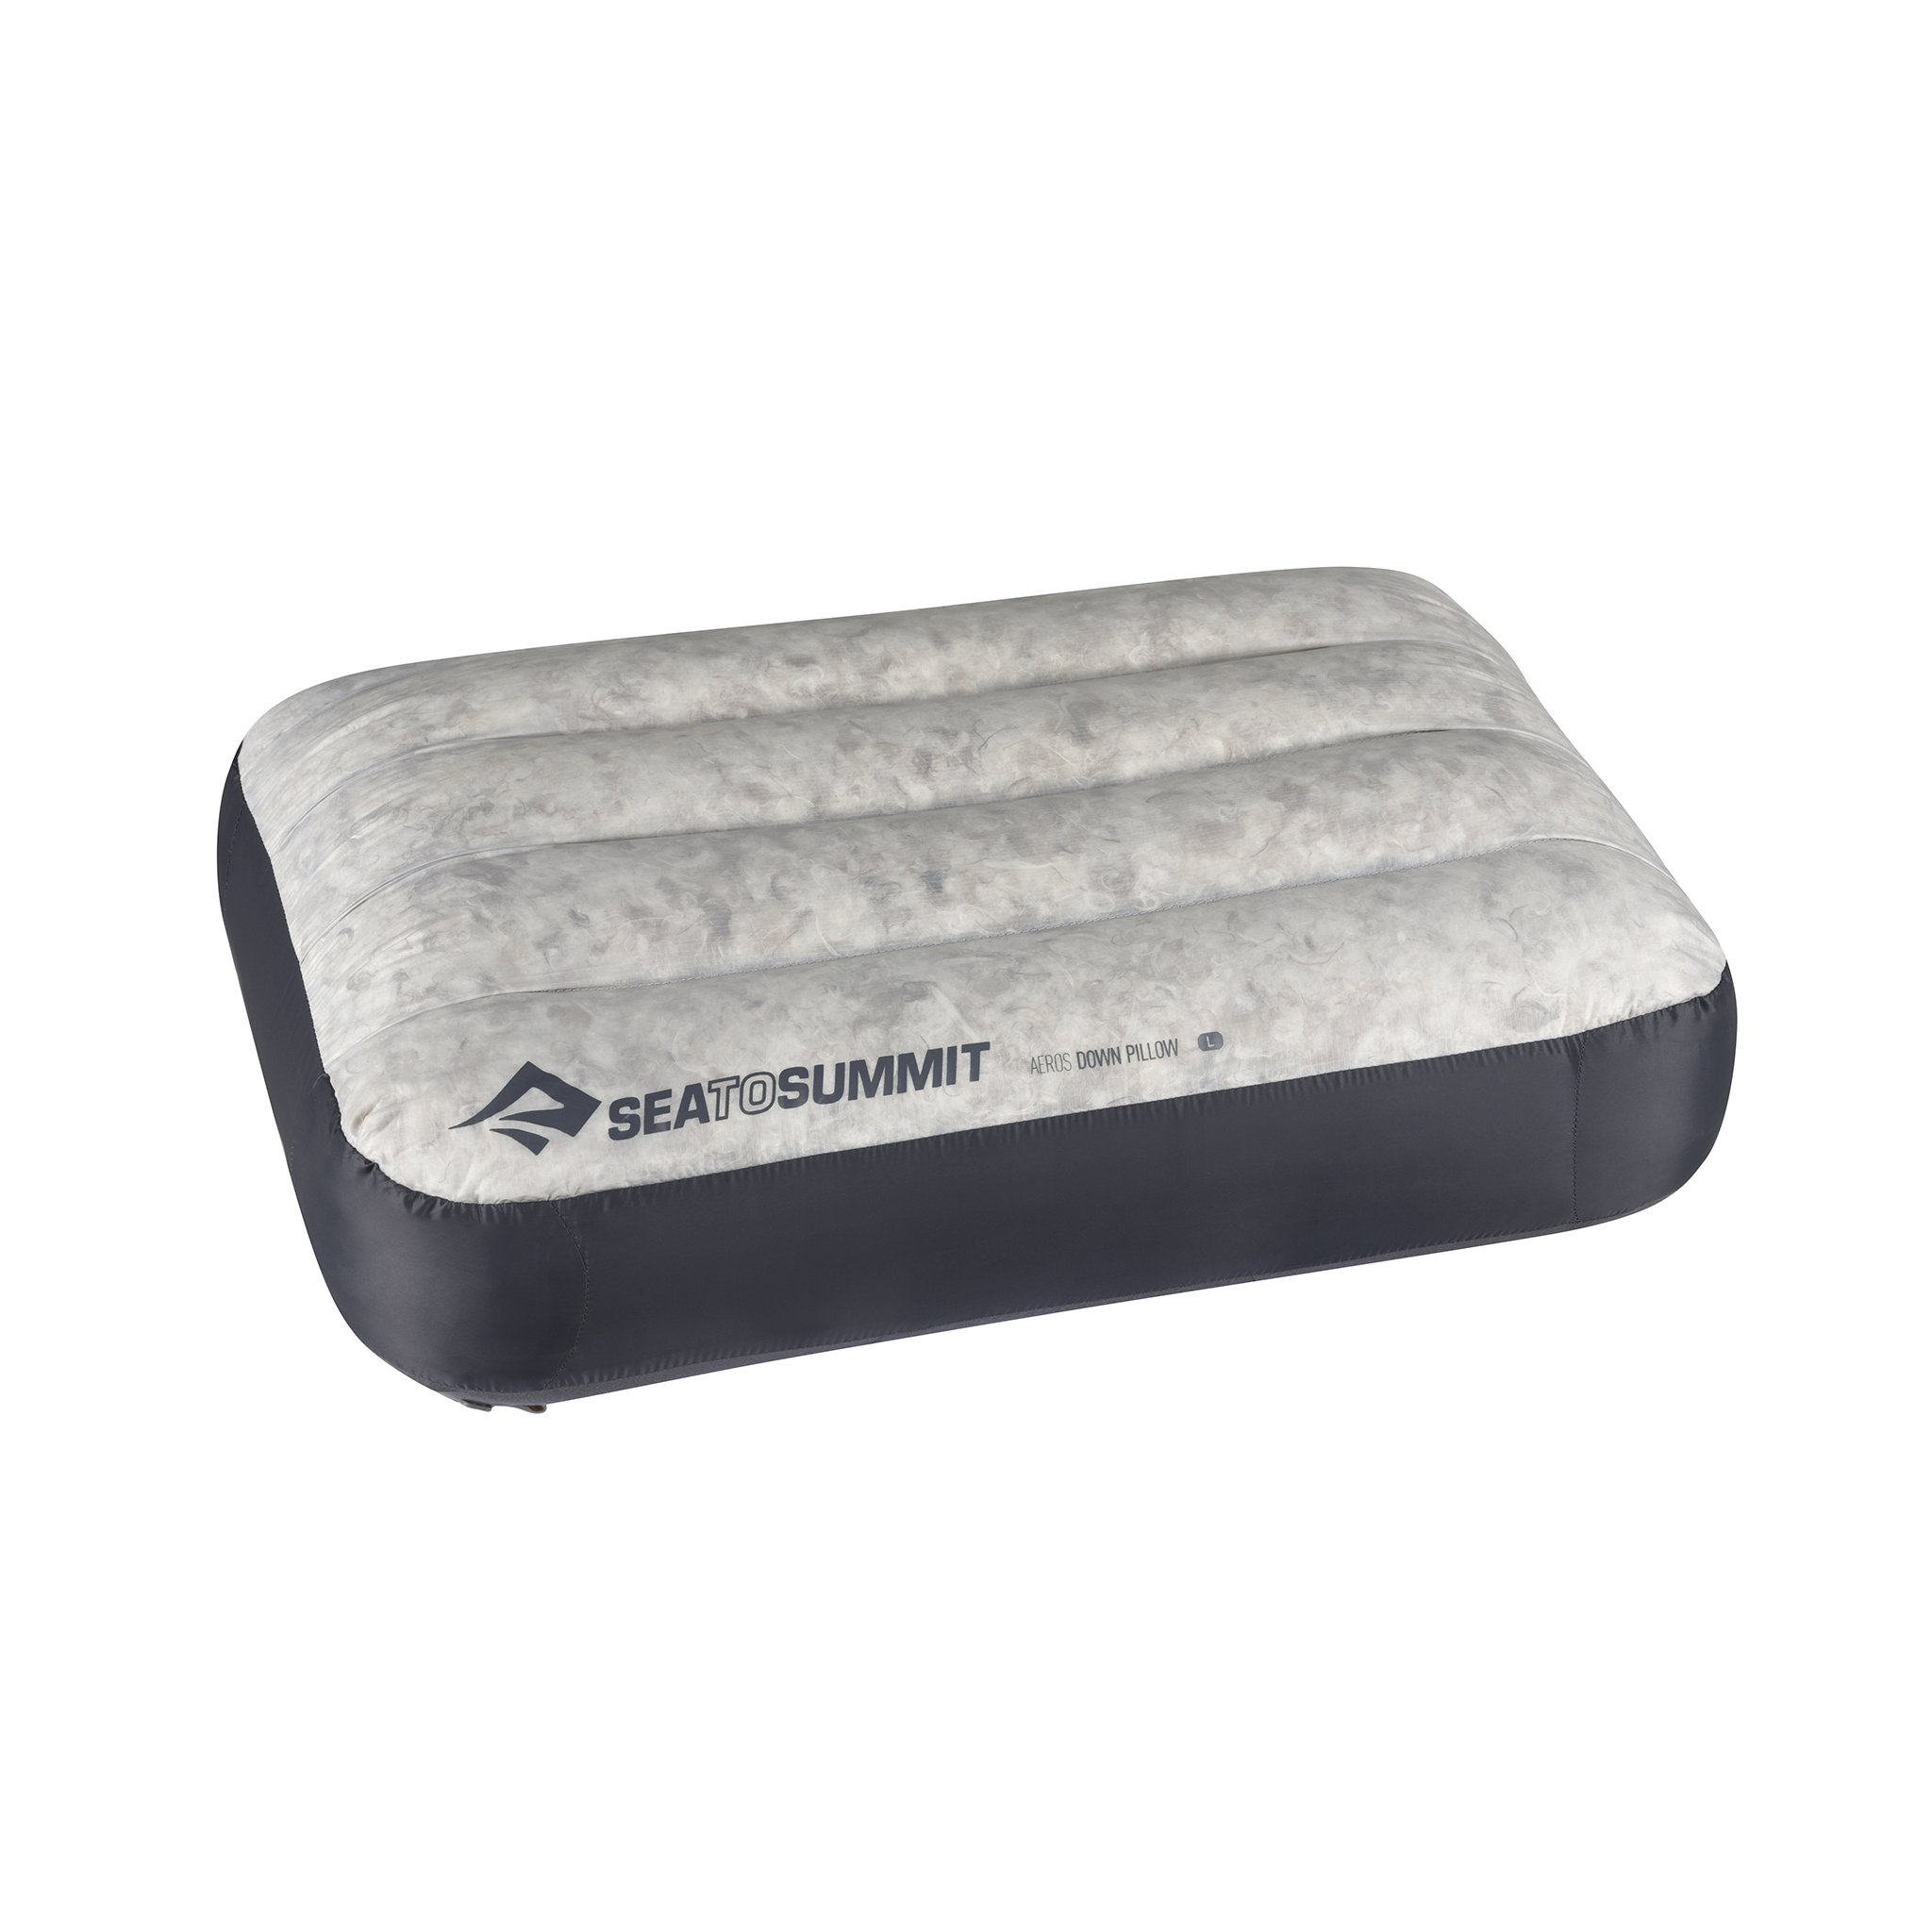 Aeros Down Pillow has an internal bladder similar to the Aeros Ultralight Deluxe Pillow, but it adds a premium down cushion top for a luxe and cushy feel.